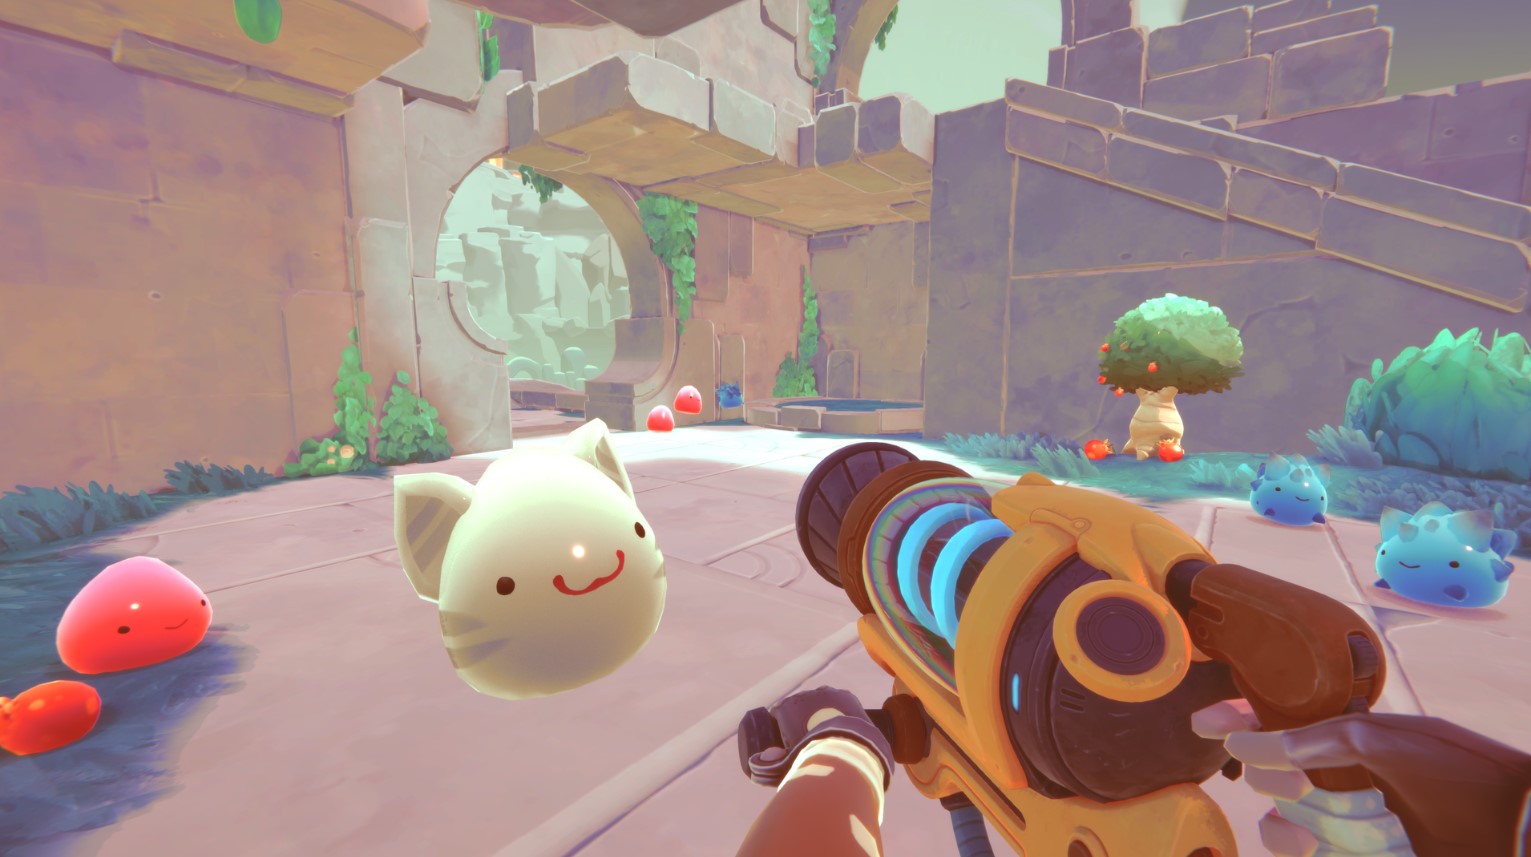 The Upcoming Slime Rancher Movie 